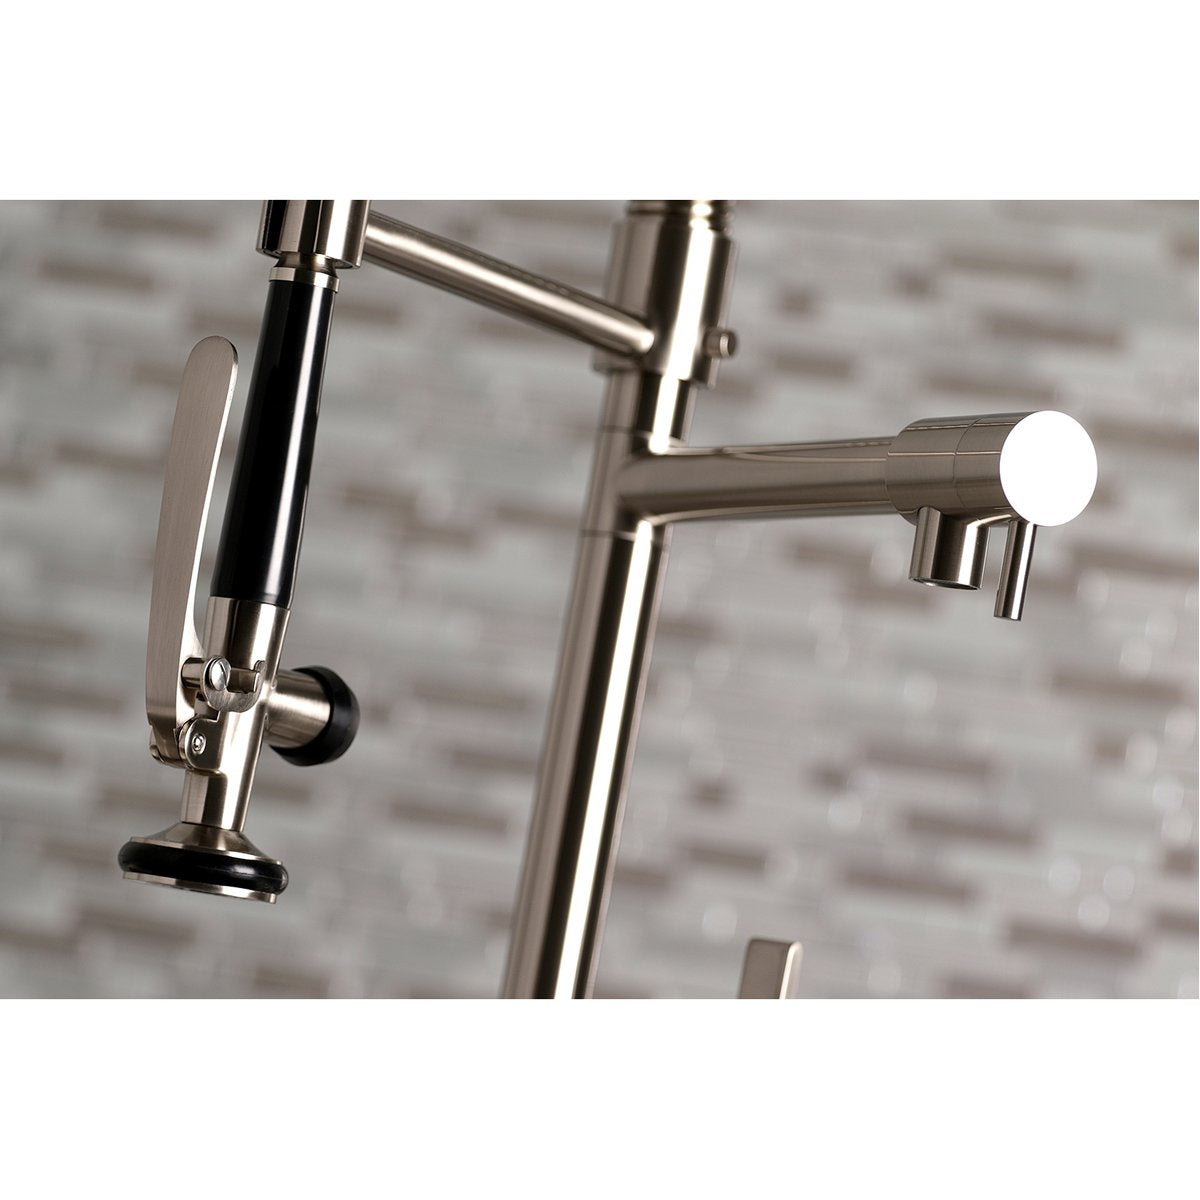 Kingston Brass Gourmetier Continental Single Hole Single-Handle Pre-Rinse Kitchen Faucet